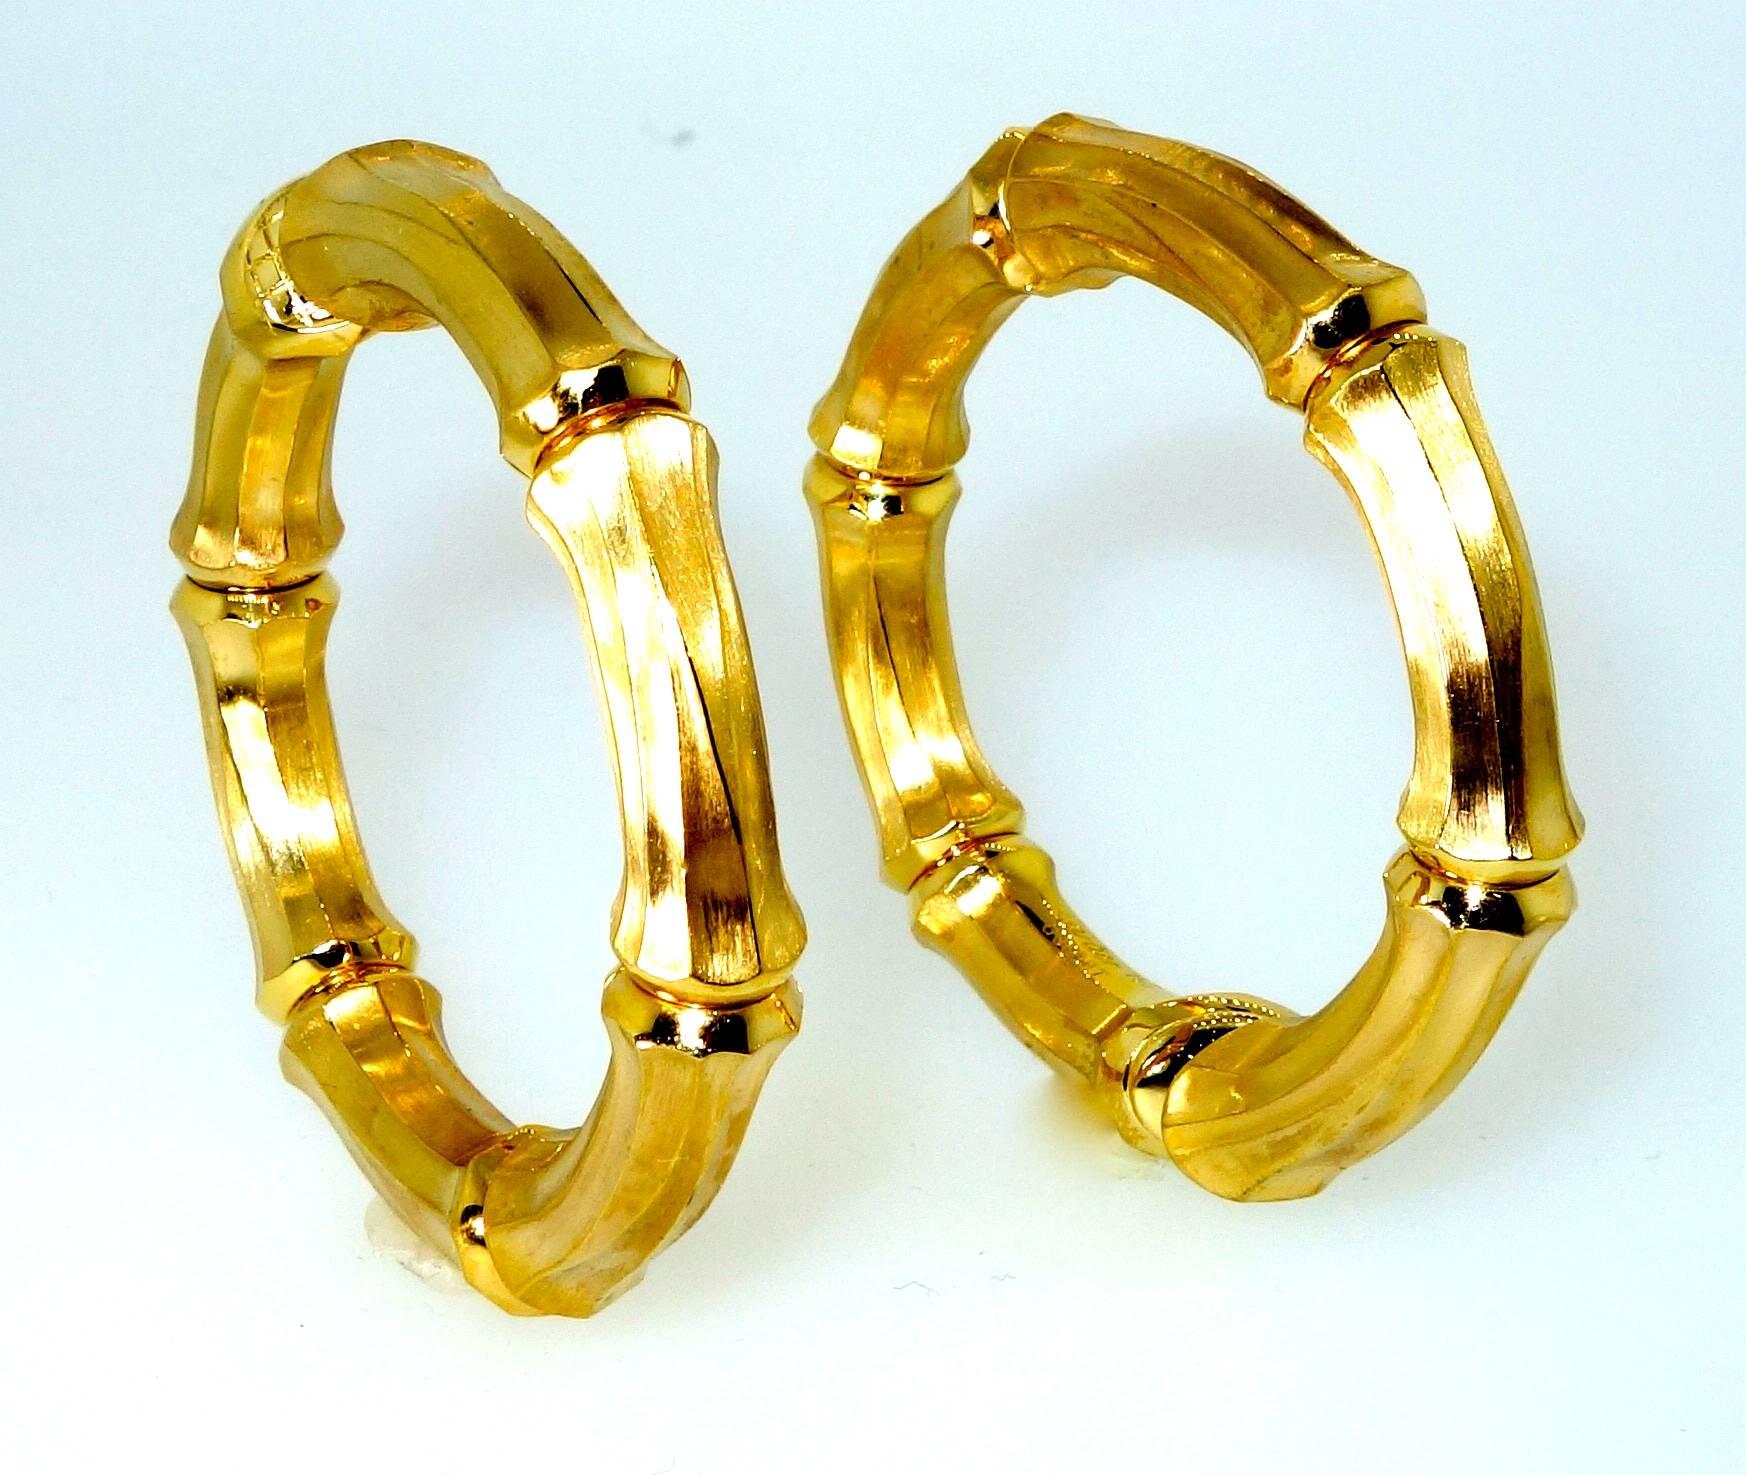 The largest size of this popular bamboo motif hoops by Cartier.  Signed and numbered with the marks for 18K, these hoops are two inches in diameter and the width varies from 1/4th to 5/8 inches and weigh 38.8 grams. These earrings are now for a non